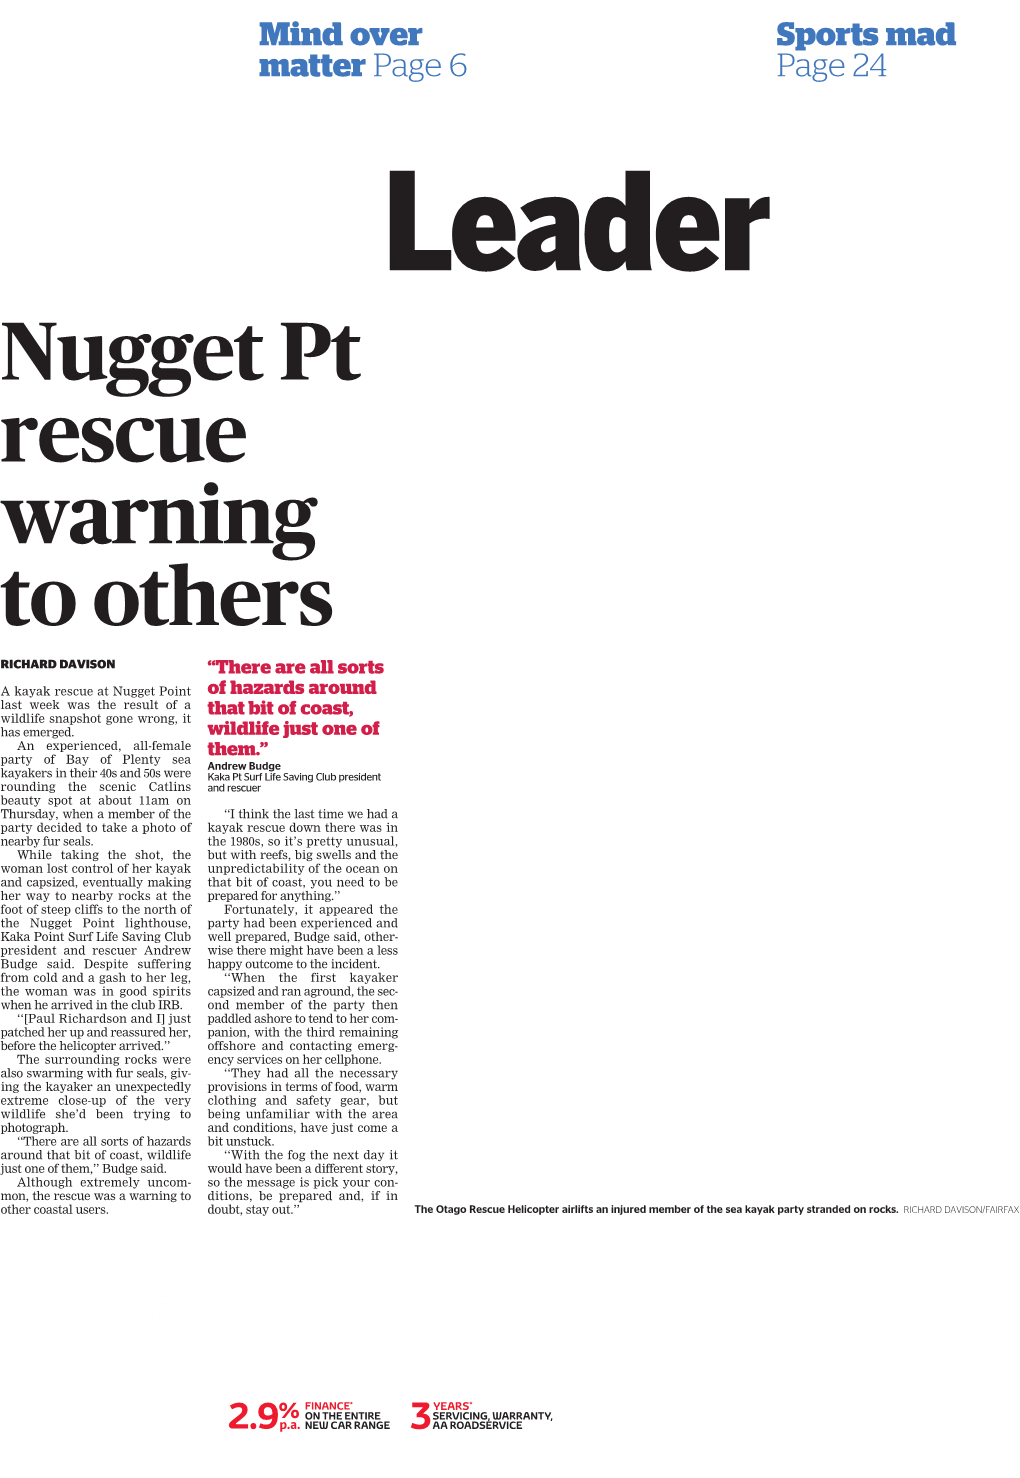 Nugget Pt Rescue Warning to Others